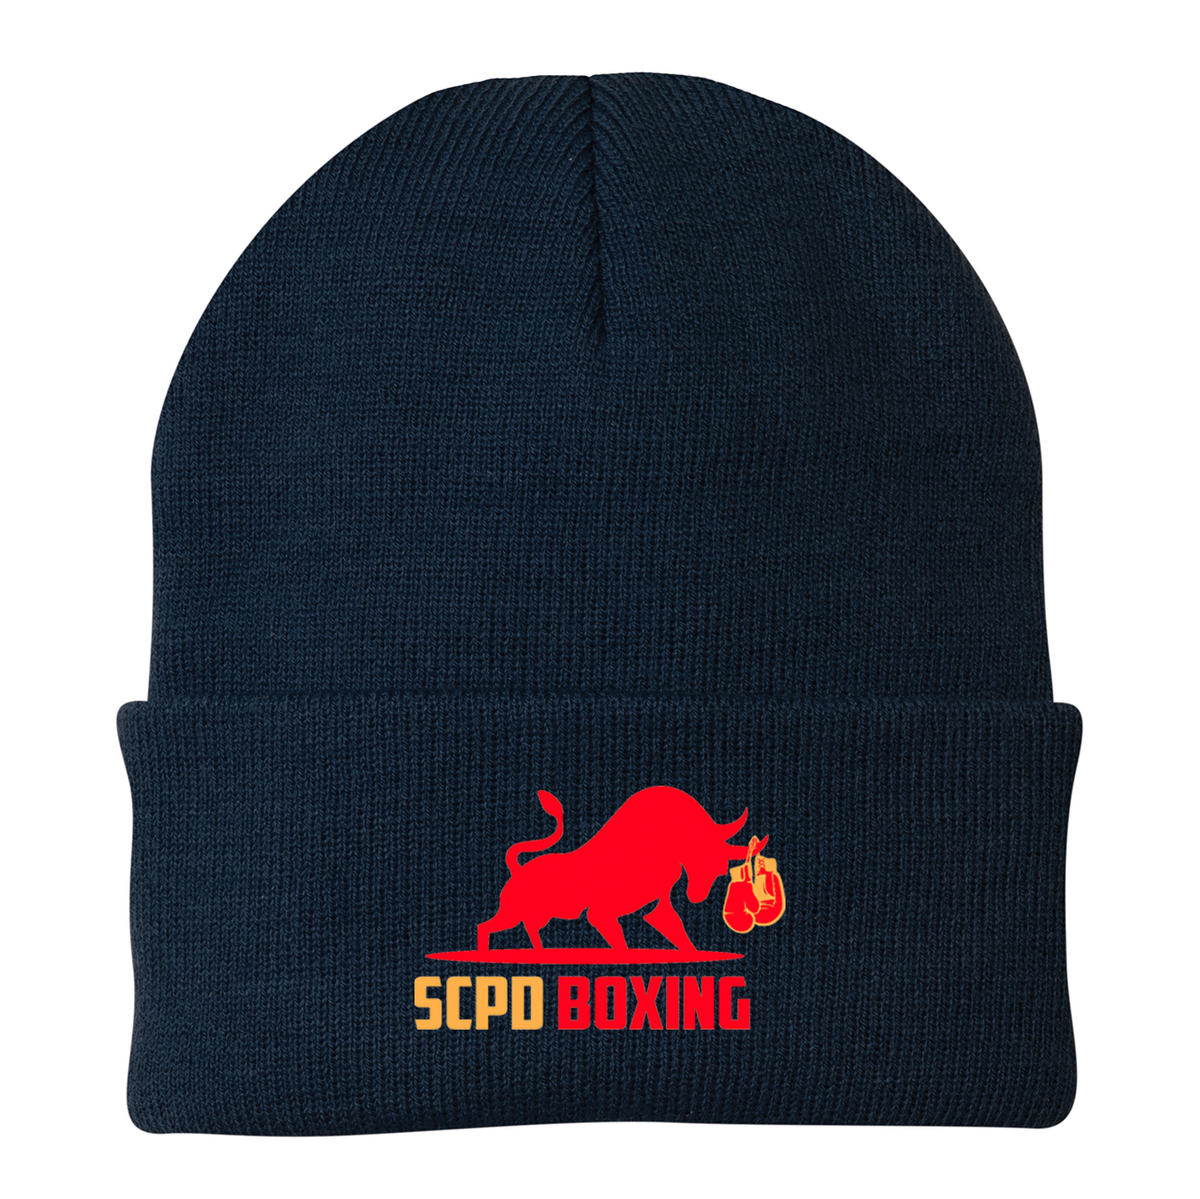 SCPD Boxing Knit Beanie